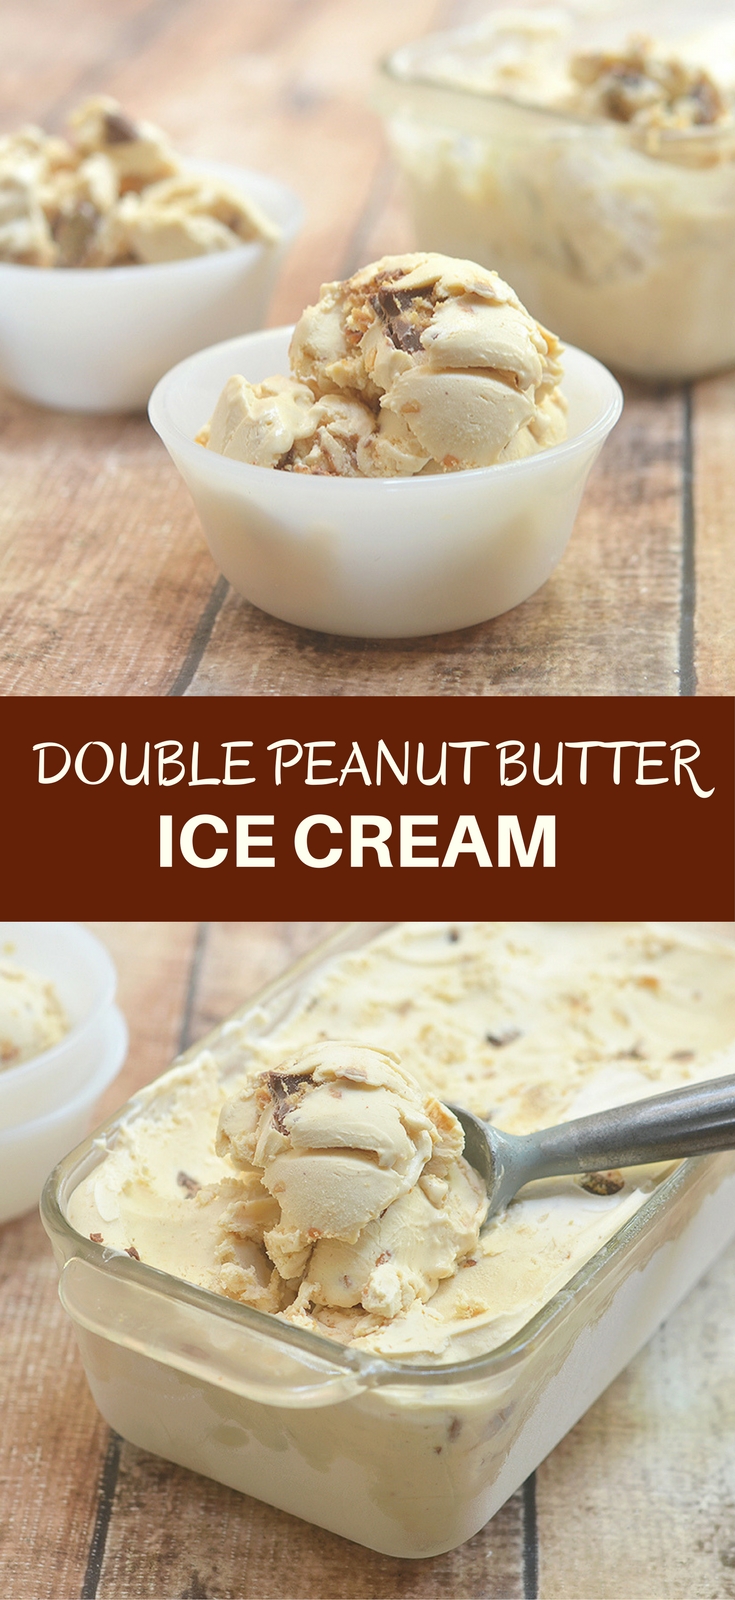 Double Peanut Butter Ice Cream with chunks of Reese's peanut butter cups in a rich peanut butter ice cream. So easy to make with only 4 ingredients and no churn or ice cream maker needed!